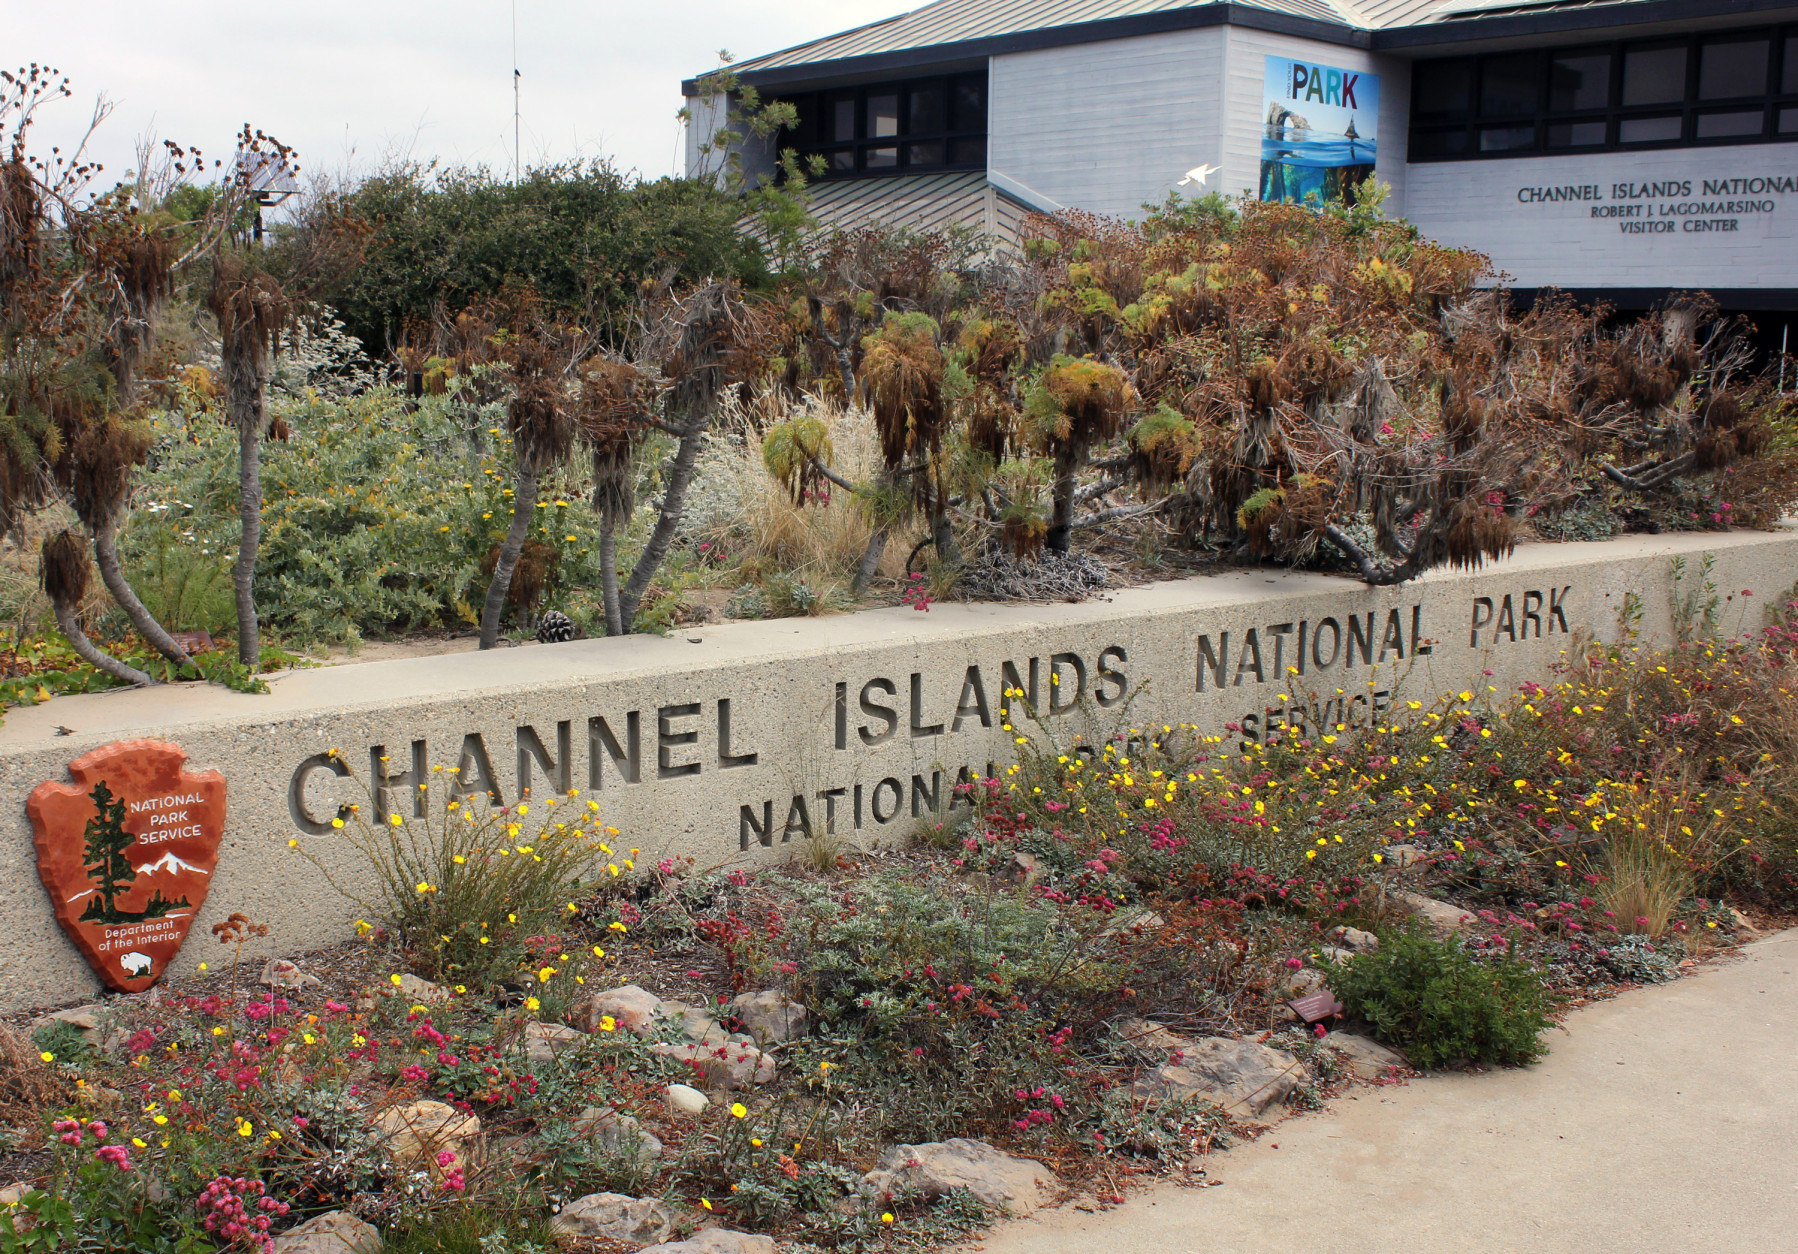 This May 30, 2016 photo shows the Channel Islands National Park visitors center in Ventura, Calif. (AP Photo/John Antczak)